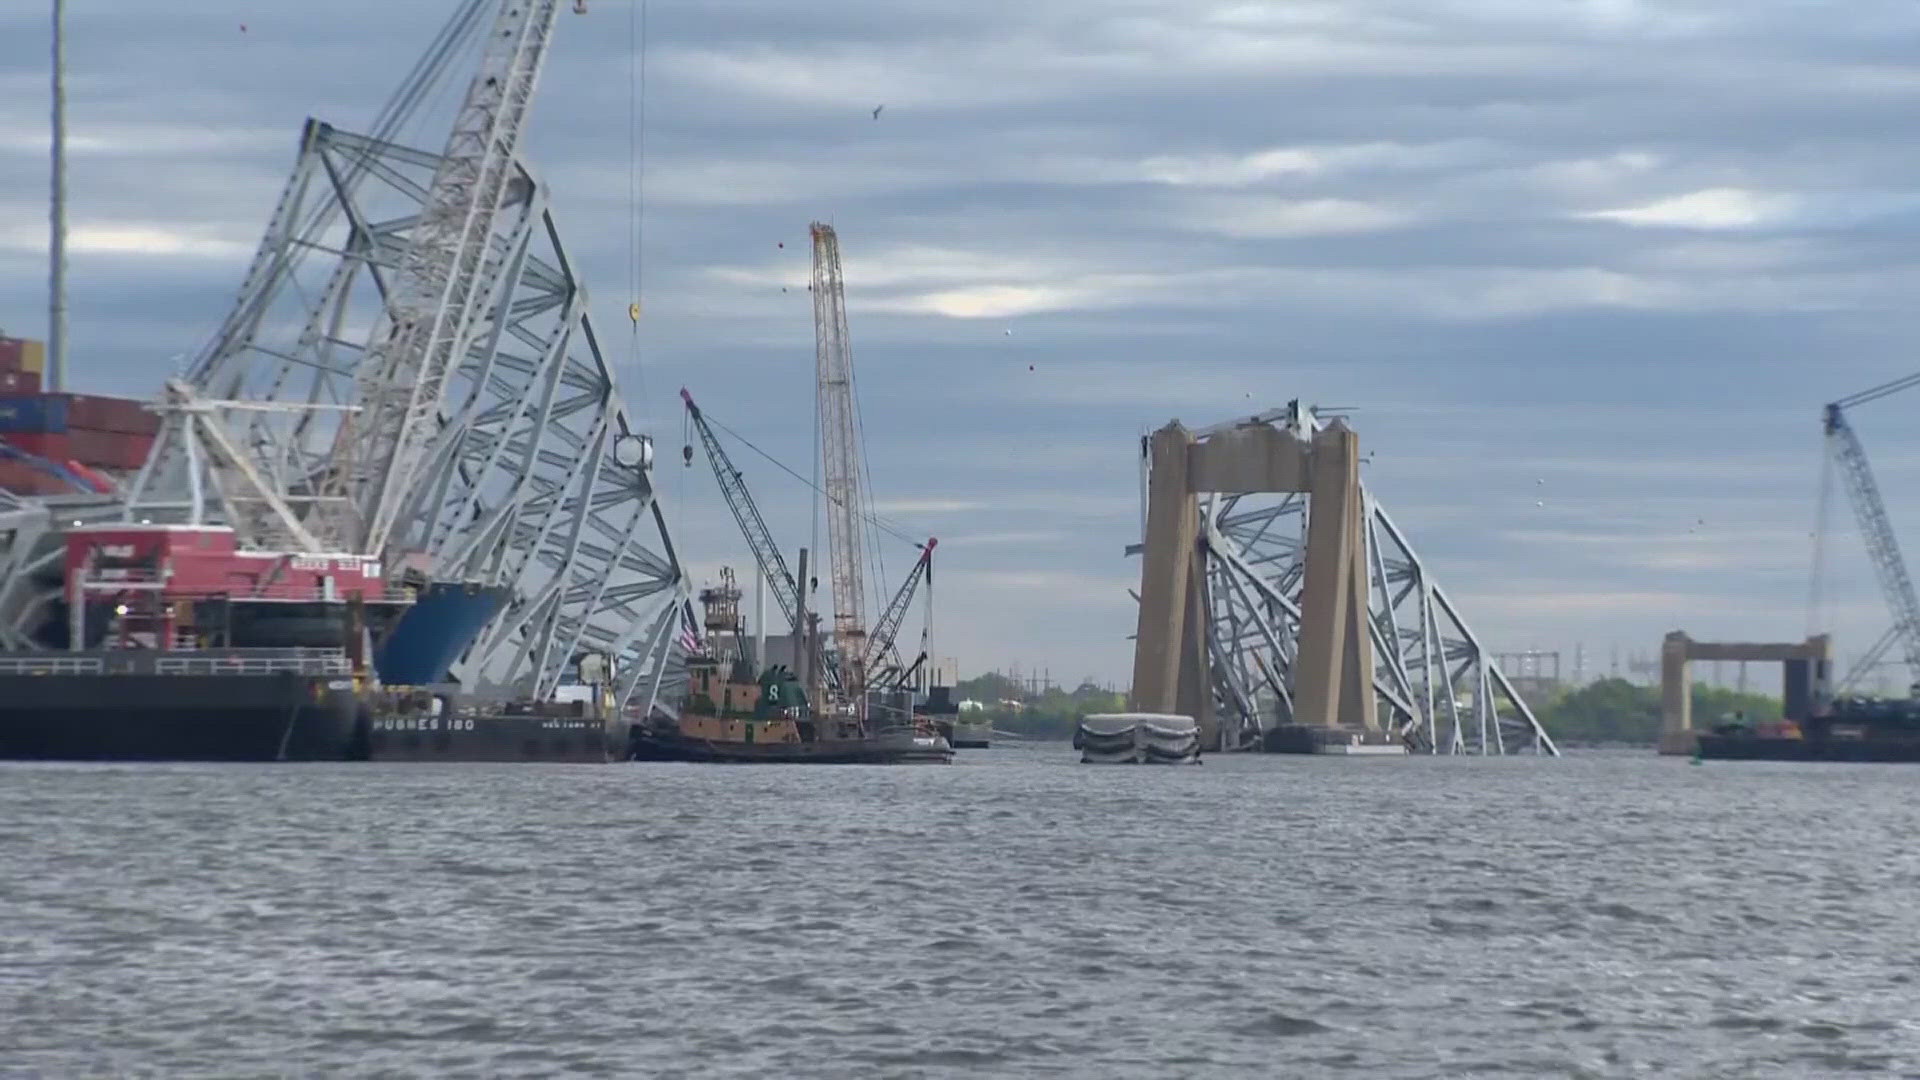 The Francis Scott Key Bridge collapsed in March after a cargo vessel slammed into it. Maryland will get $350 million in insurance payouts.